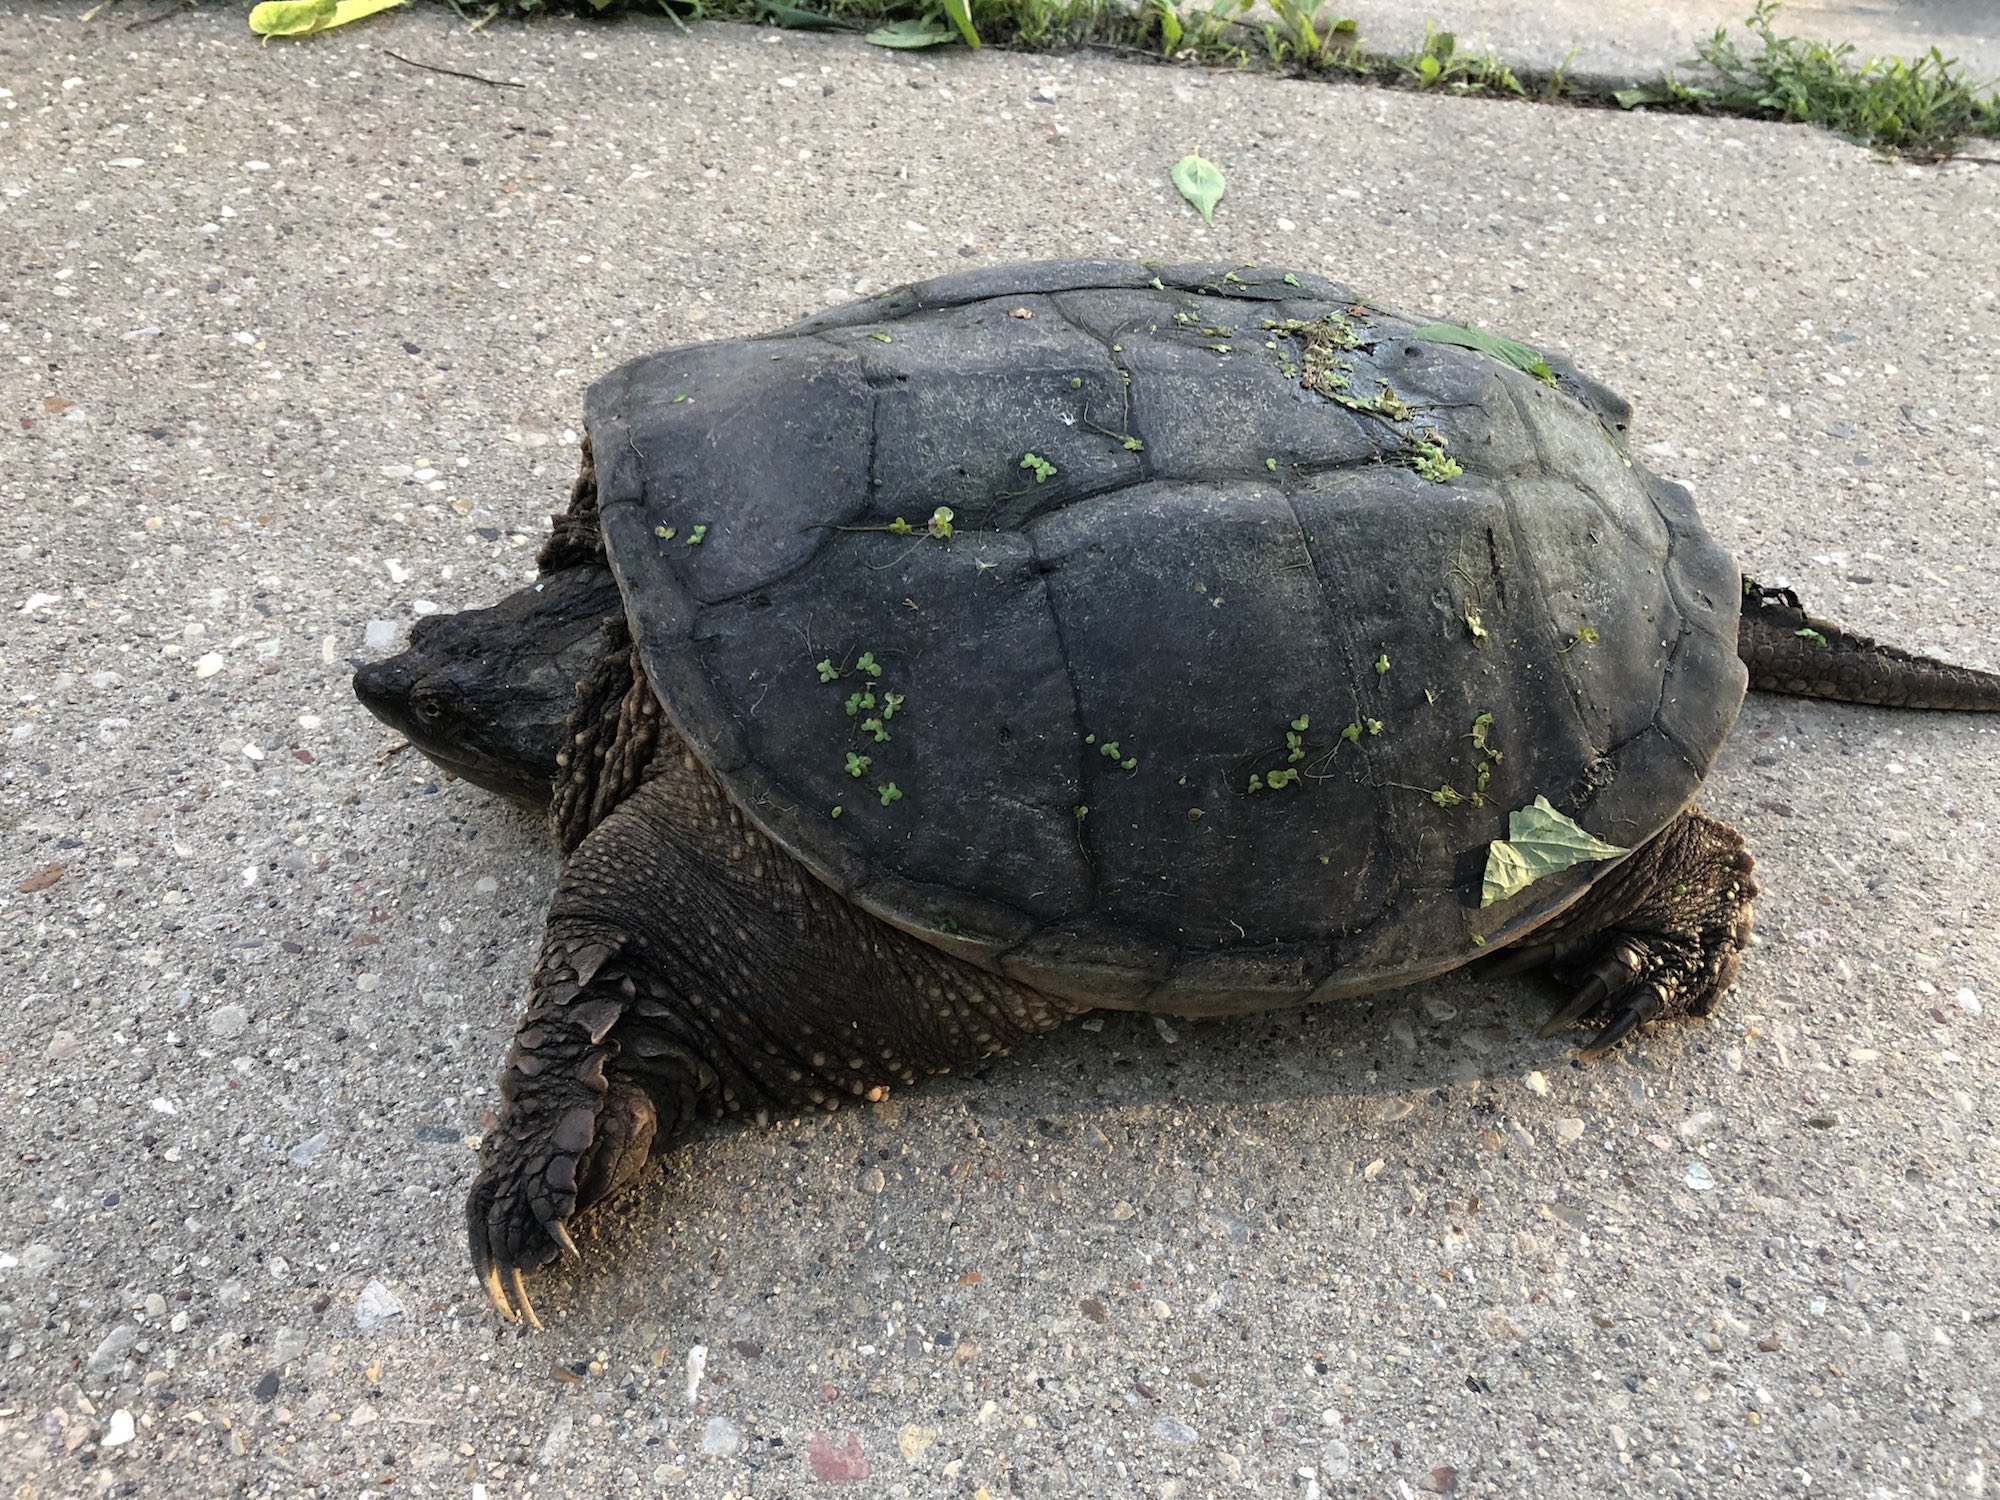 Snapping Turtle walking on sidewalk along Arbor Drive in Madison, Wisconsin on June 15, 2019.